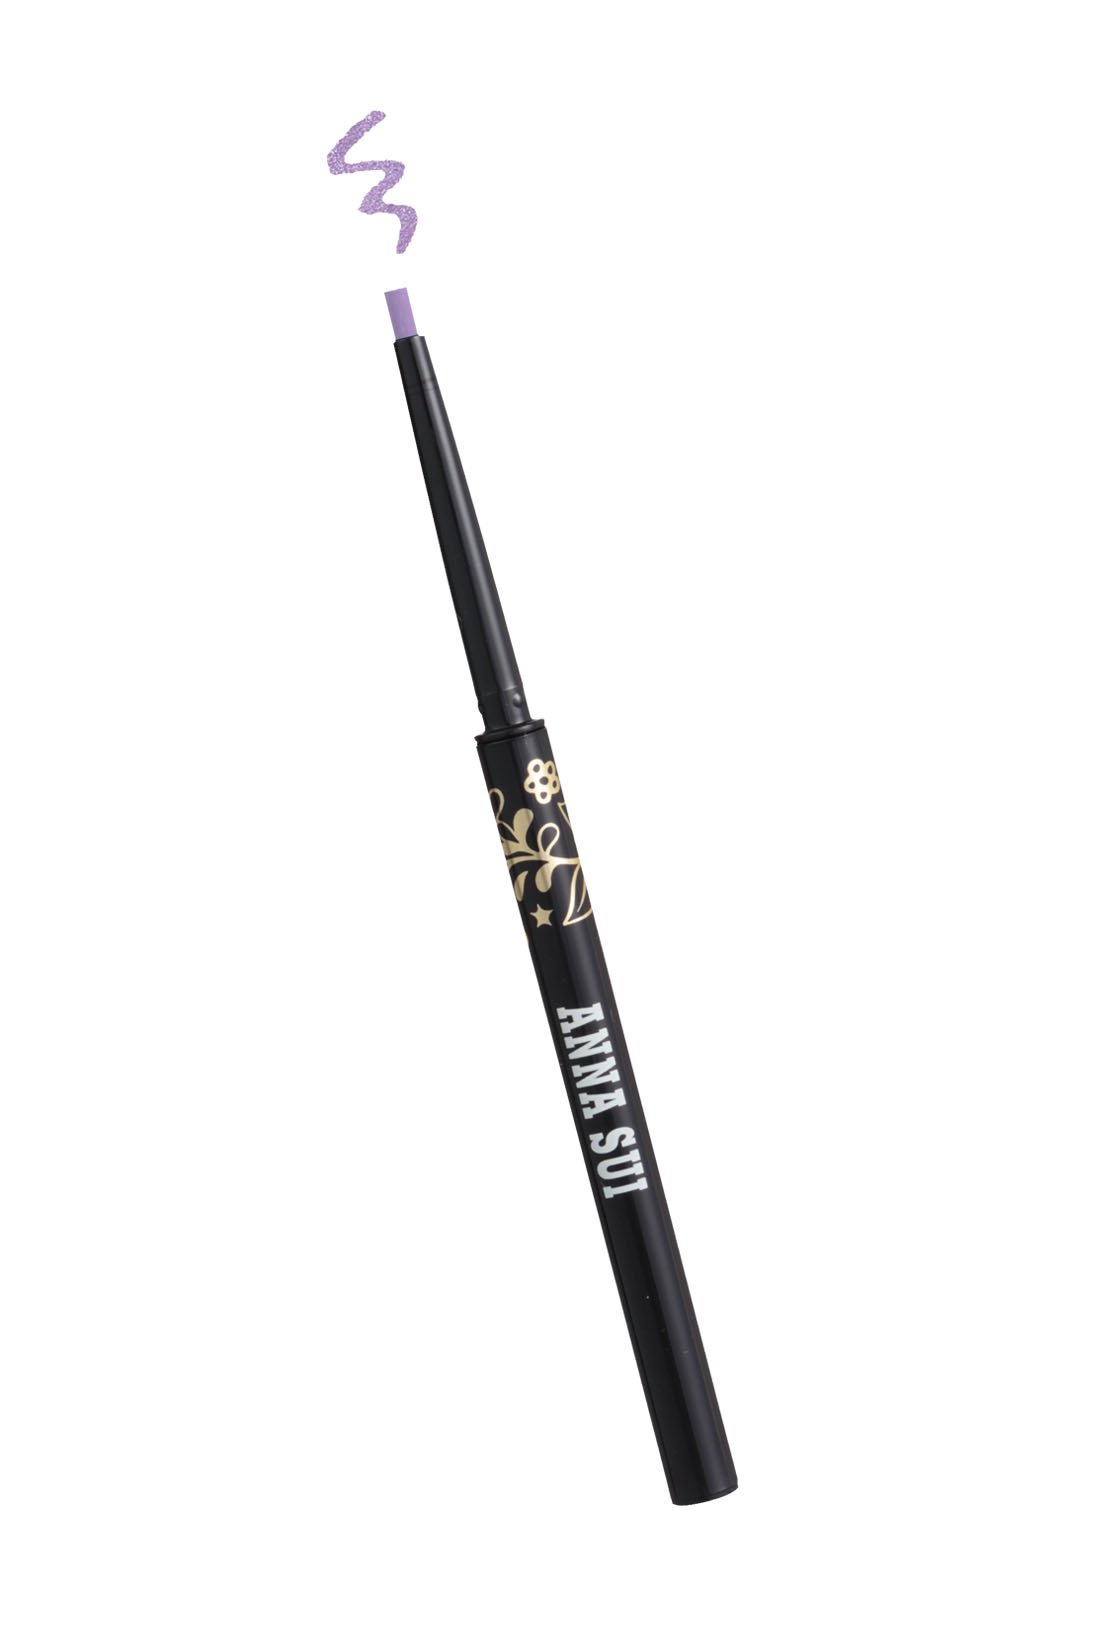 Open Fairy Purple Eyeliner in cylindrical container, golden floral design, & white Anna Sui label